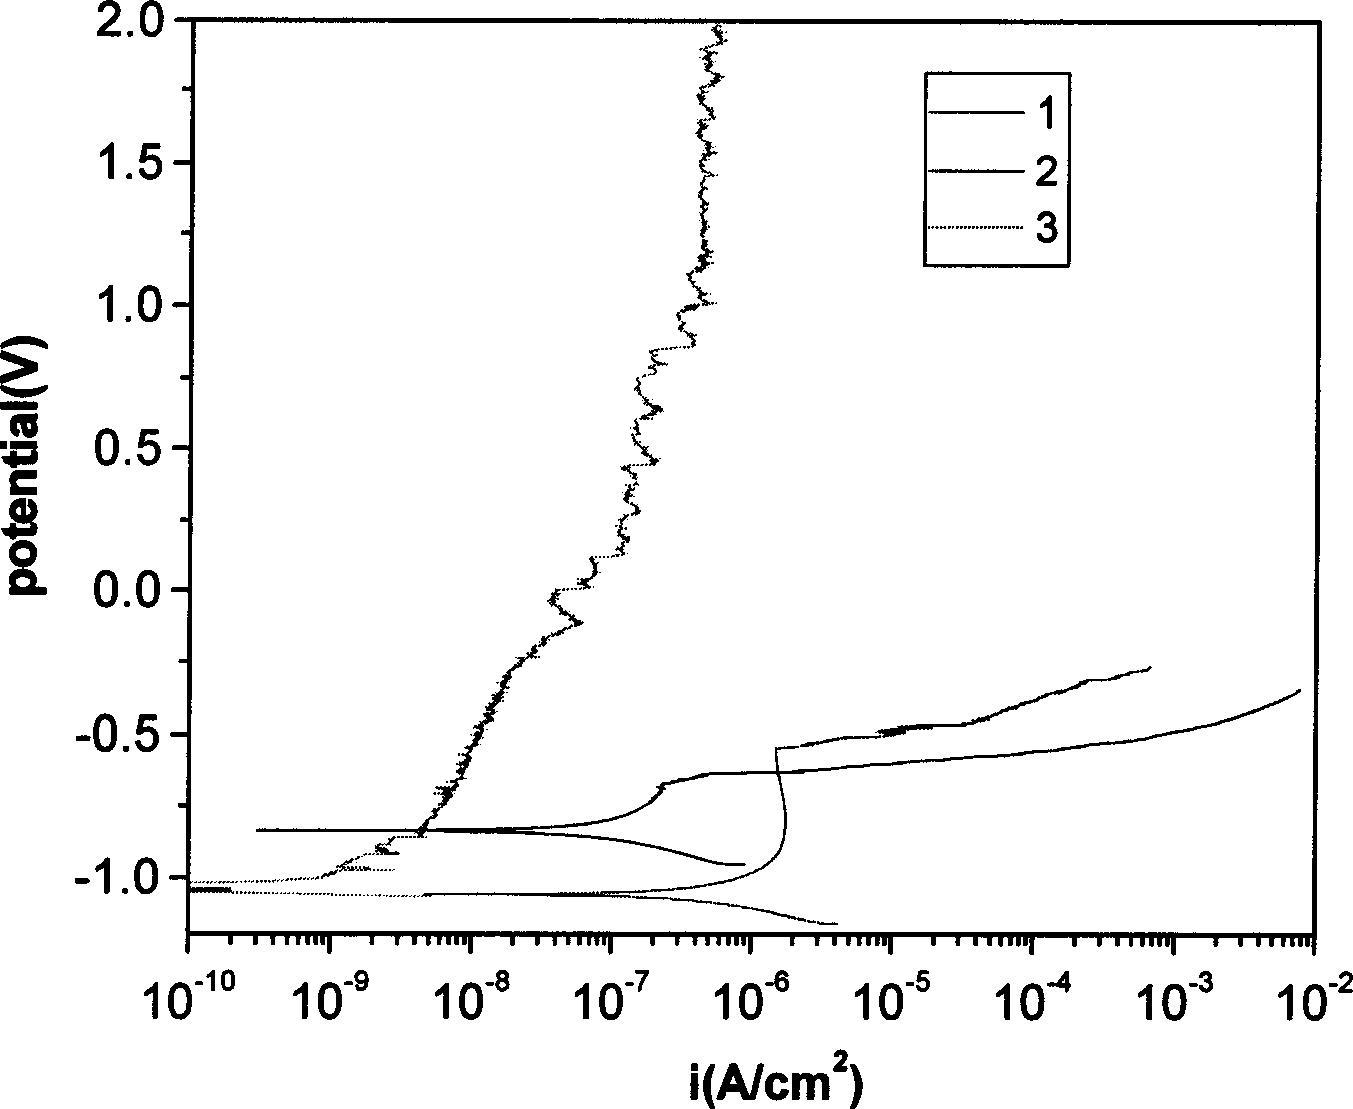 Process for cathode electrolytic deposition of rare-earth conversion film